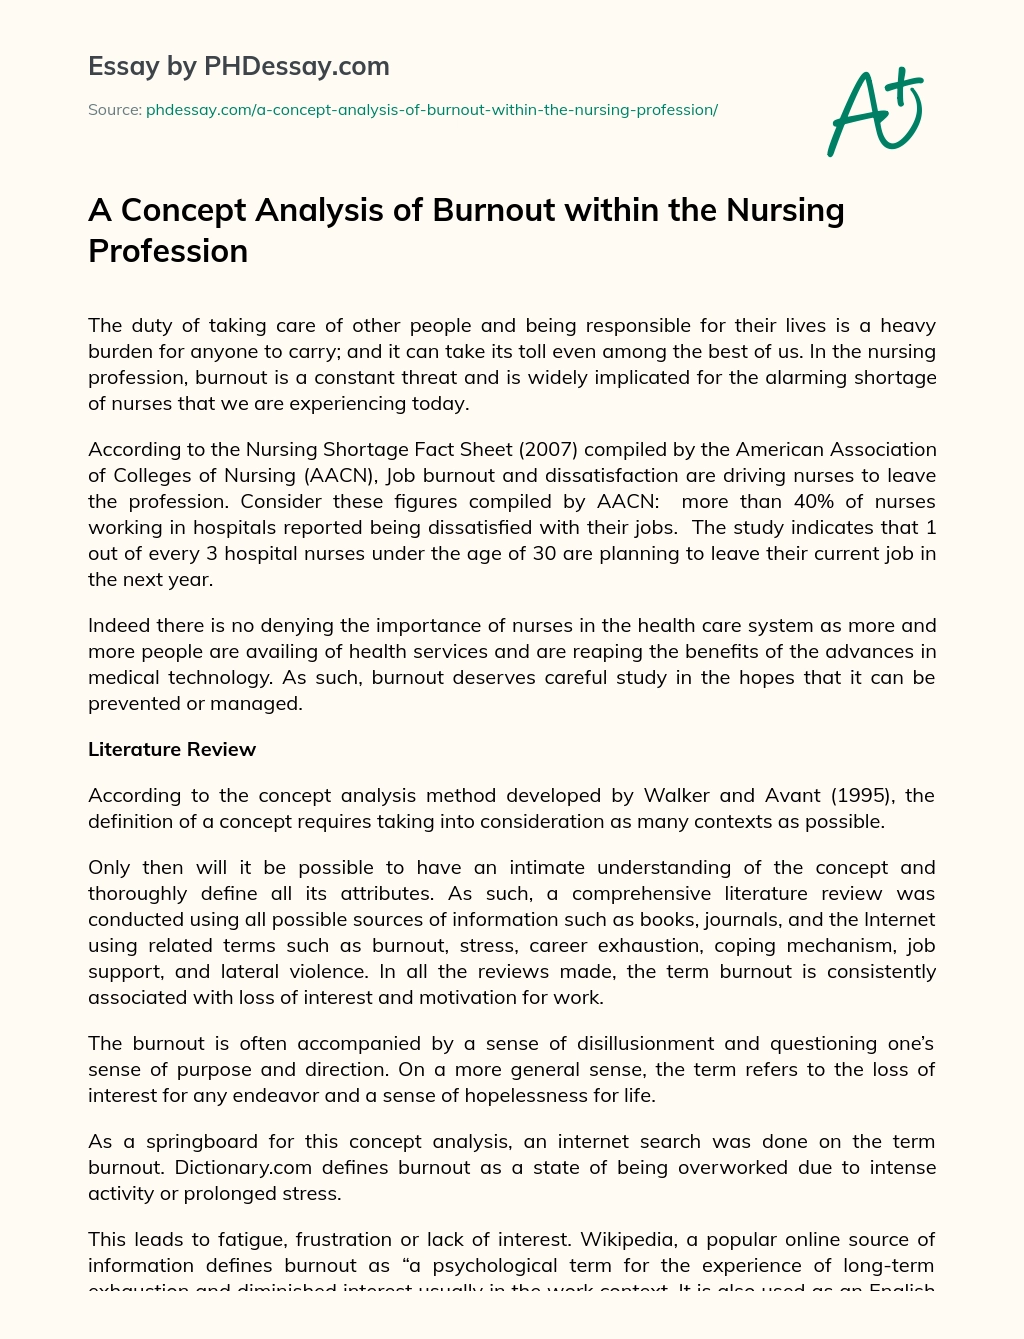 A Concept Analysis of Burnout within the Nursing Profession essay